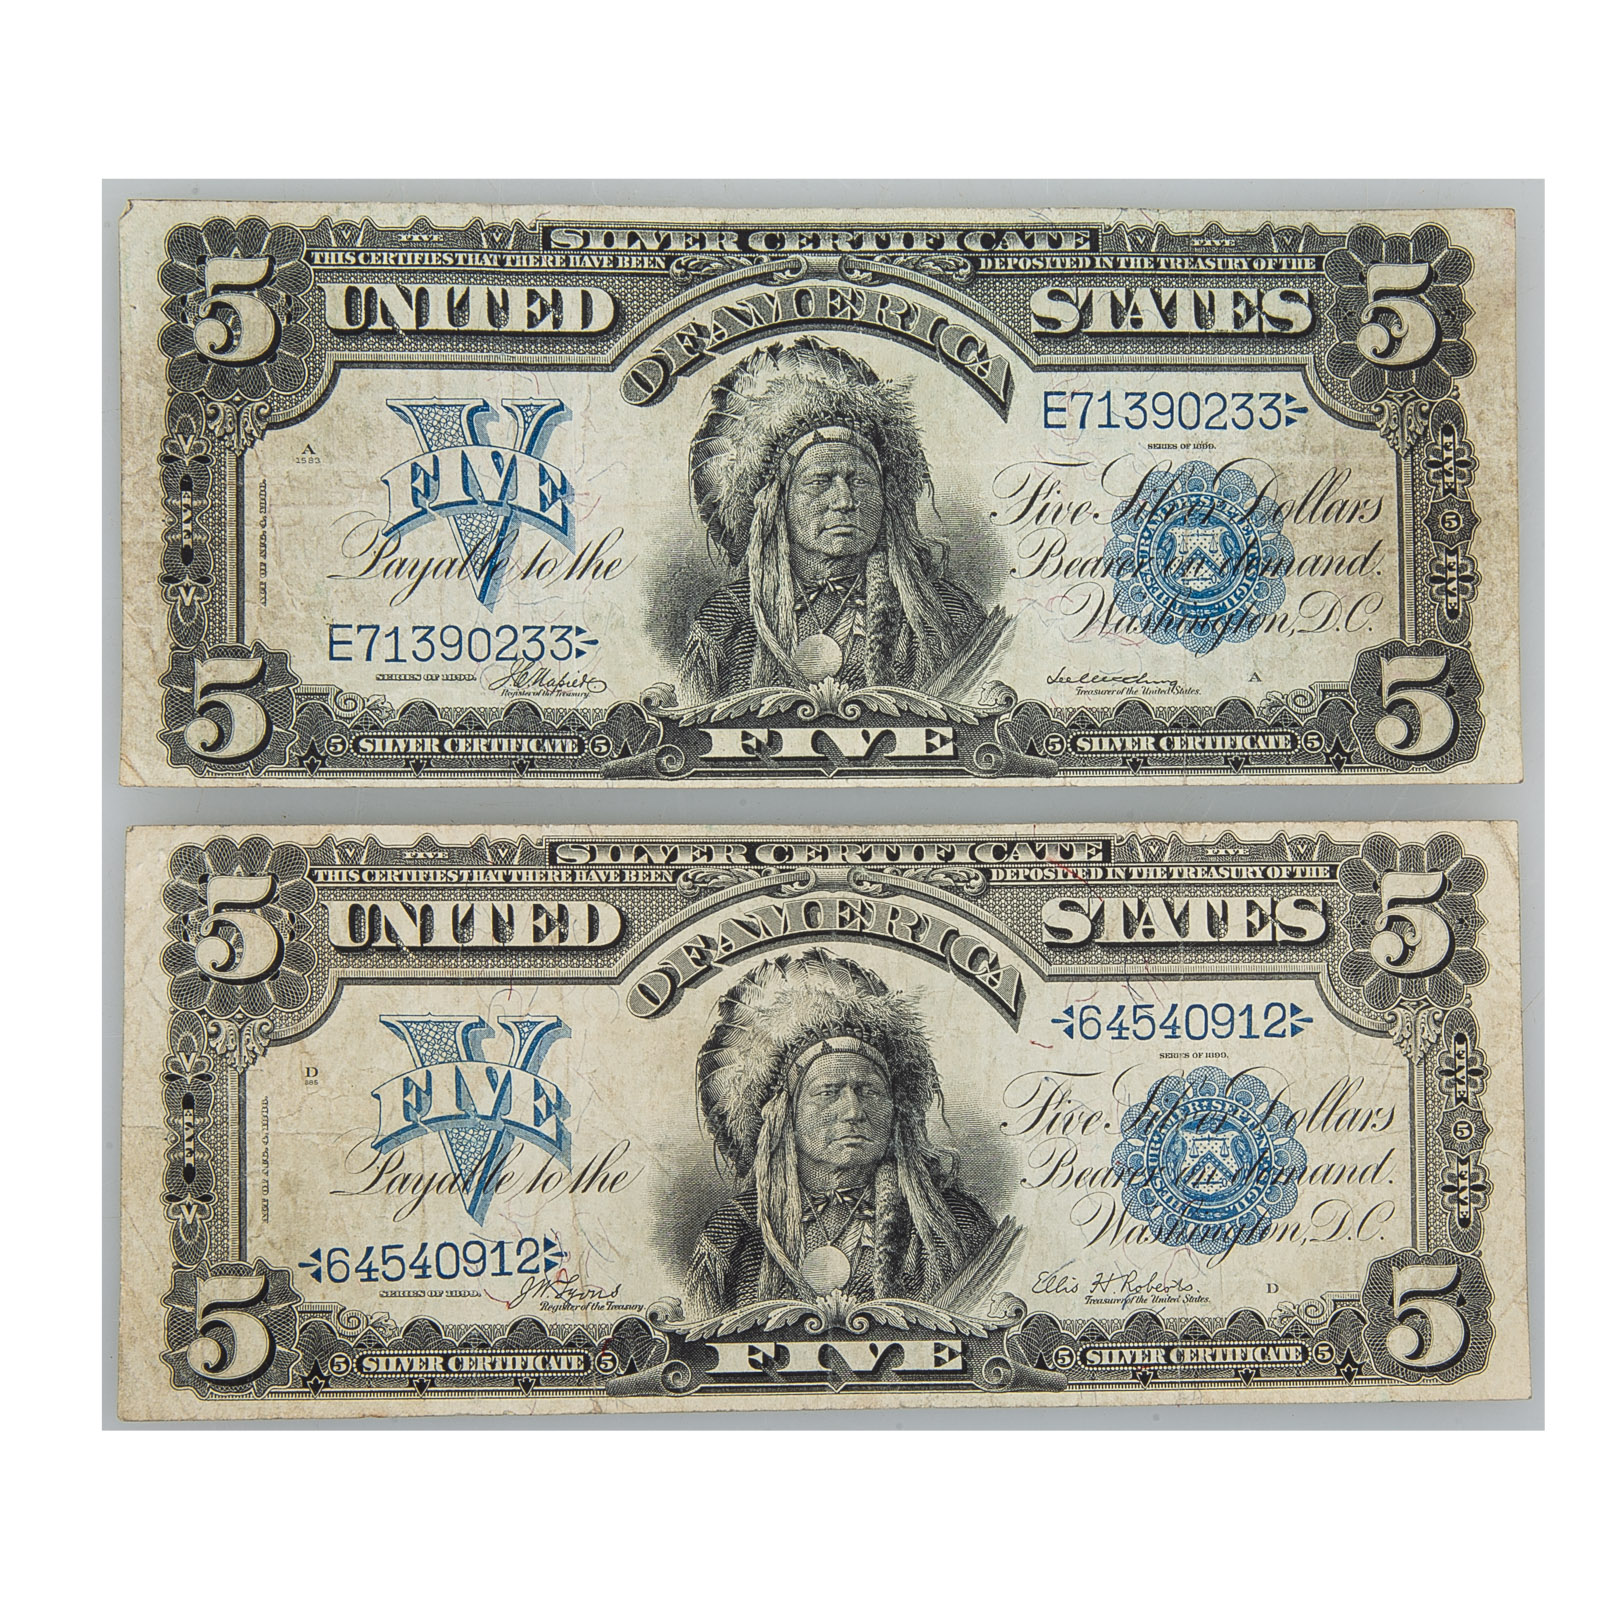 A PAIR OF VF 1899 $5 SILVER CERTIFICATE